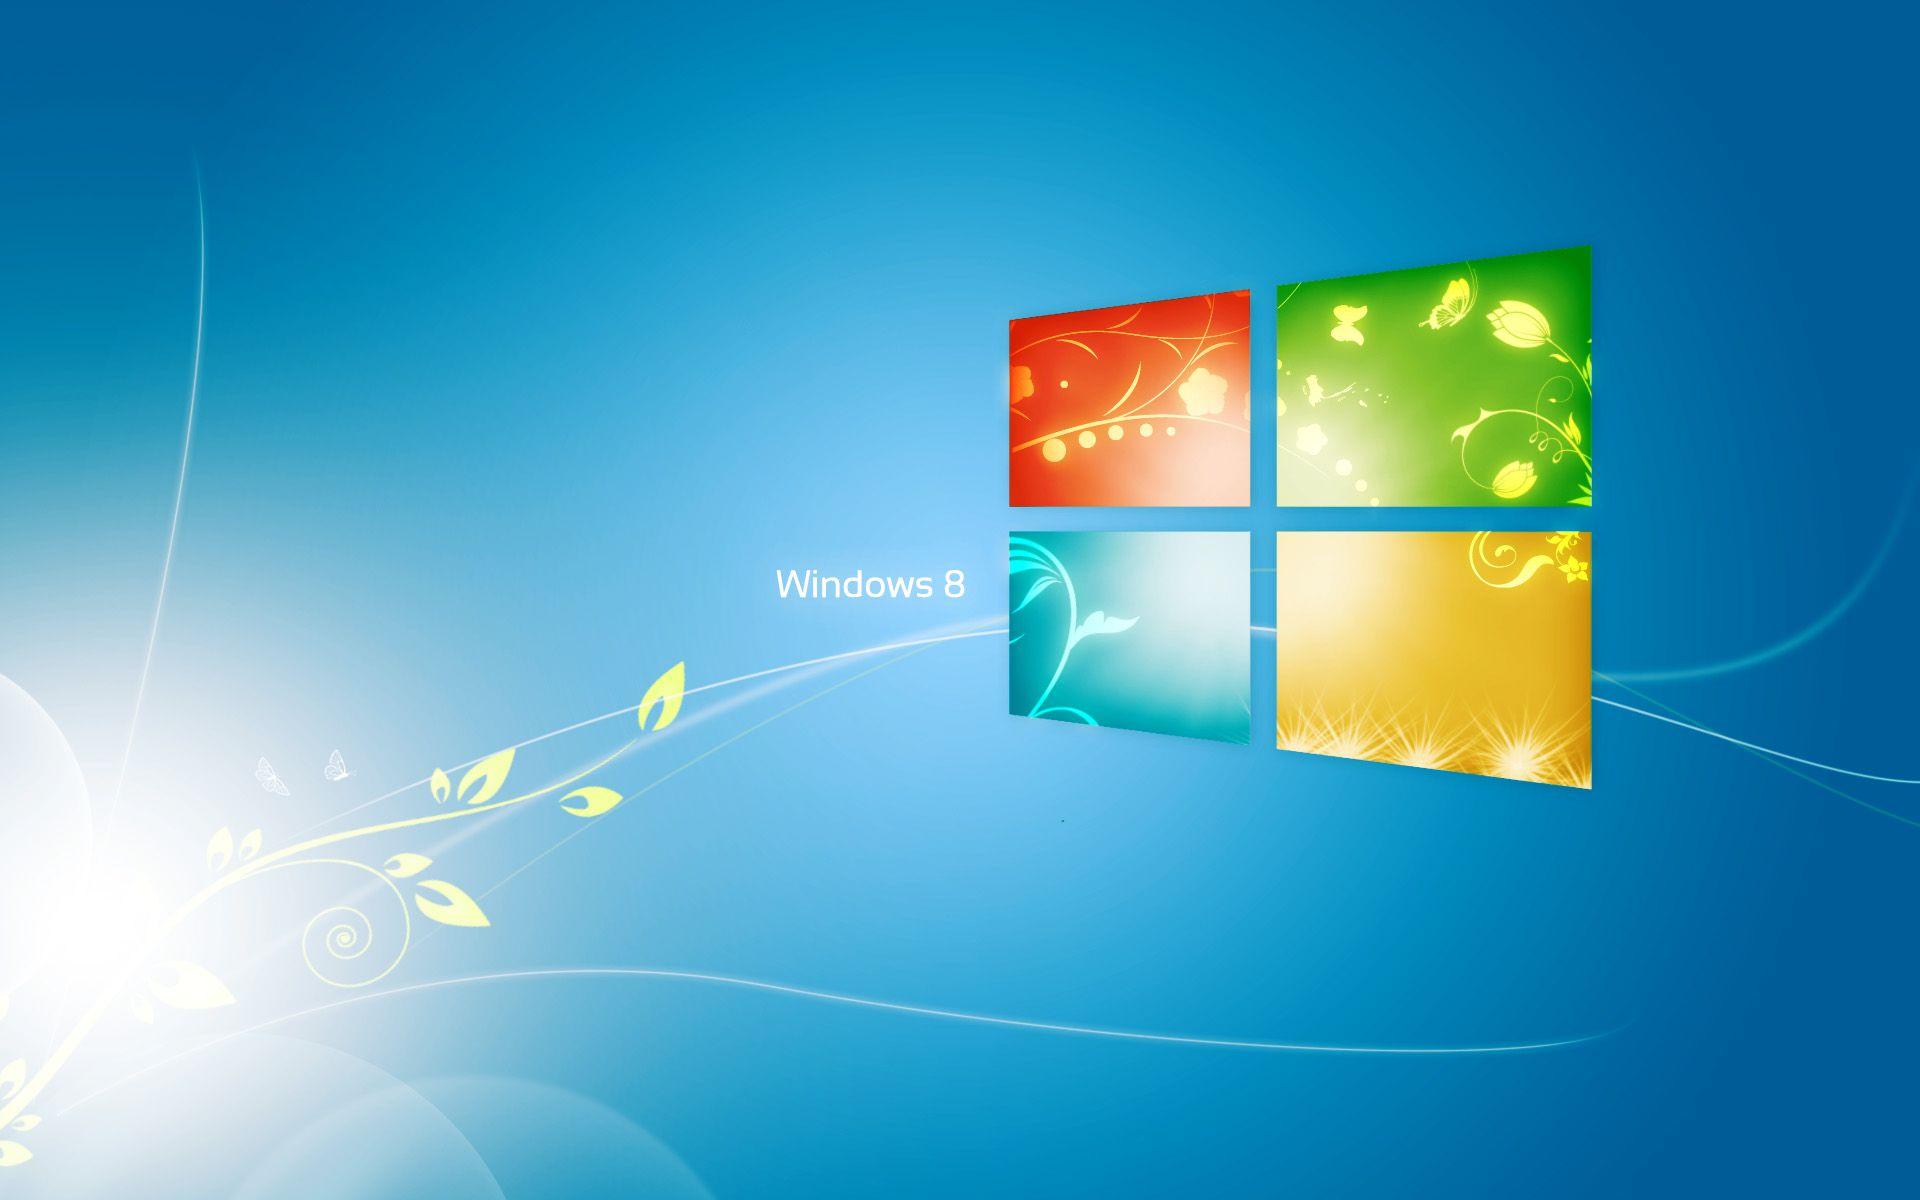 ZS 43 Windows 8 Wallpaper, Windows 8 Full HD Picture and Wallpaper